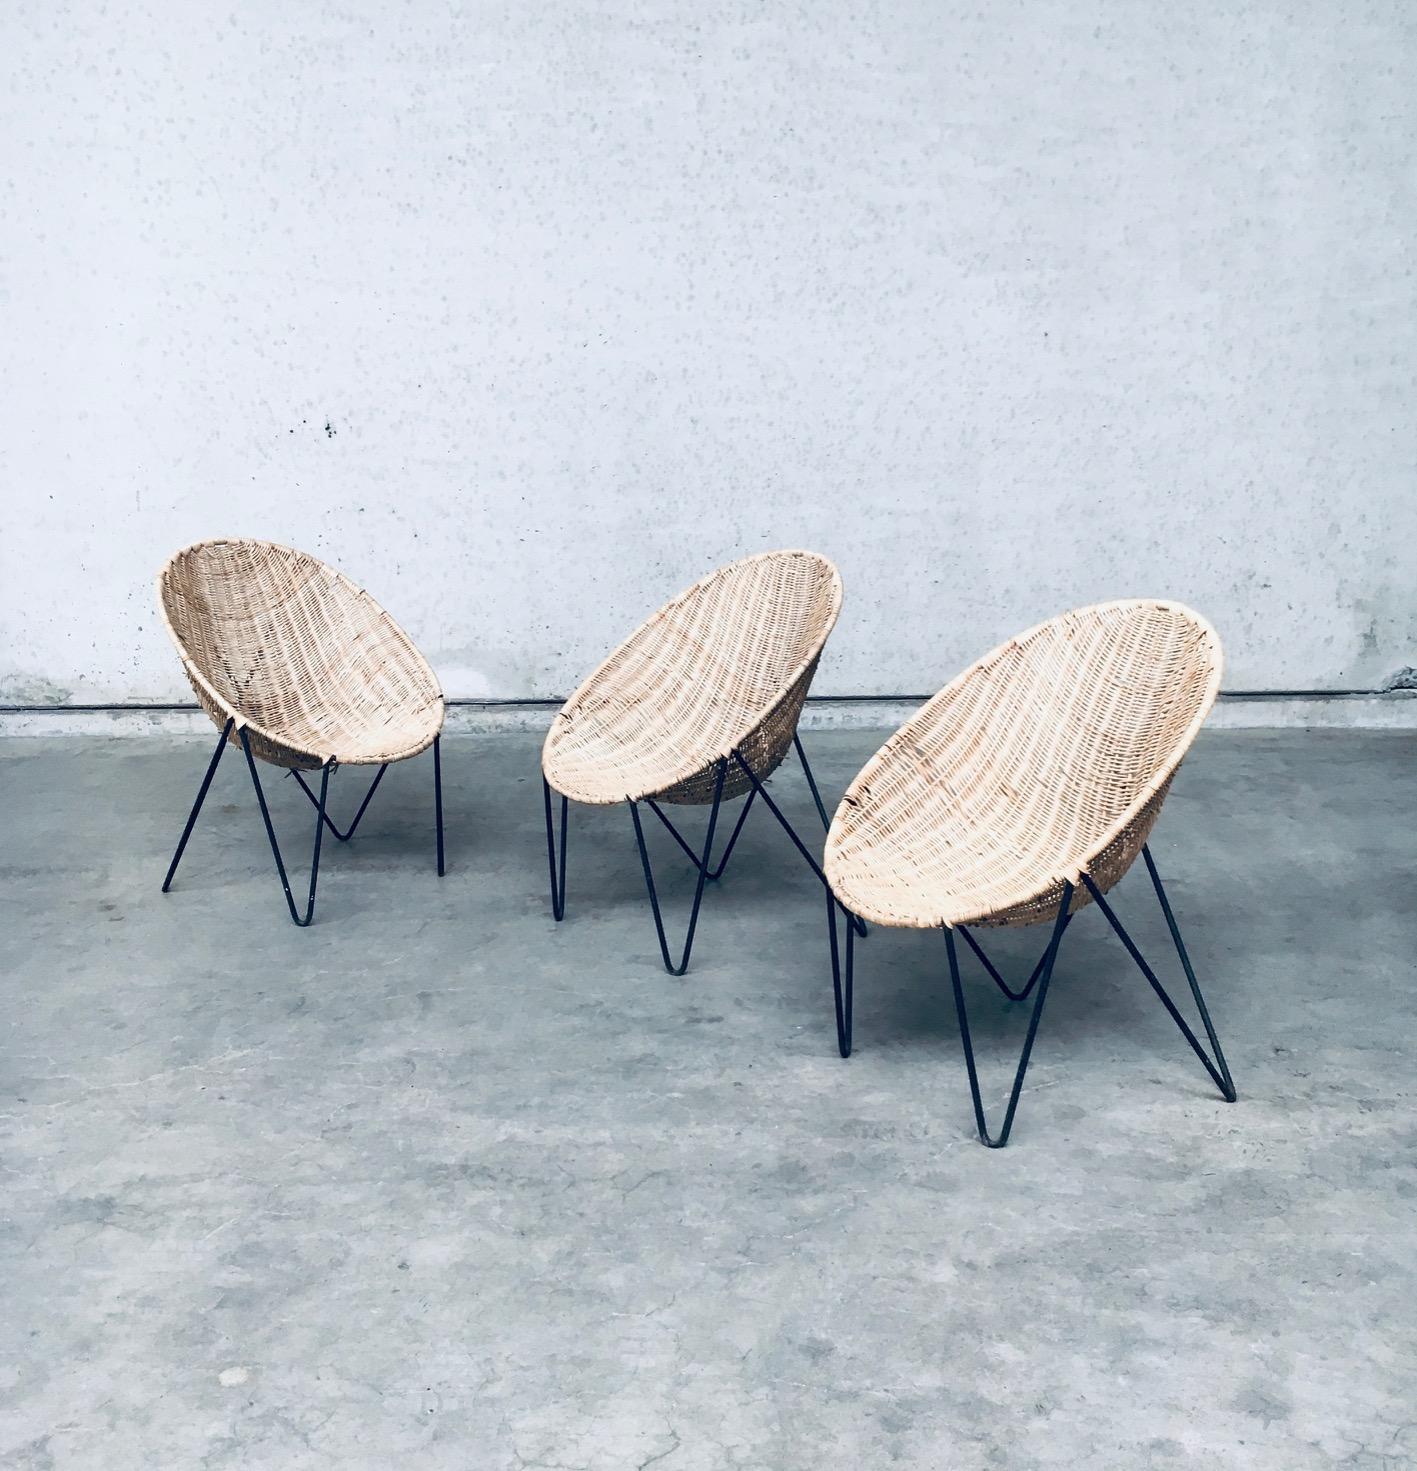 Midcentury Modern Design EGG Basket Wicker Chair set, Italy 1950's In Good Condition For Sale In Oud-Turnhout, VAN